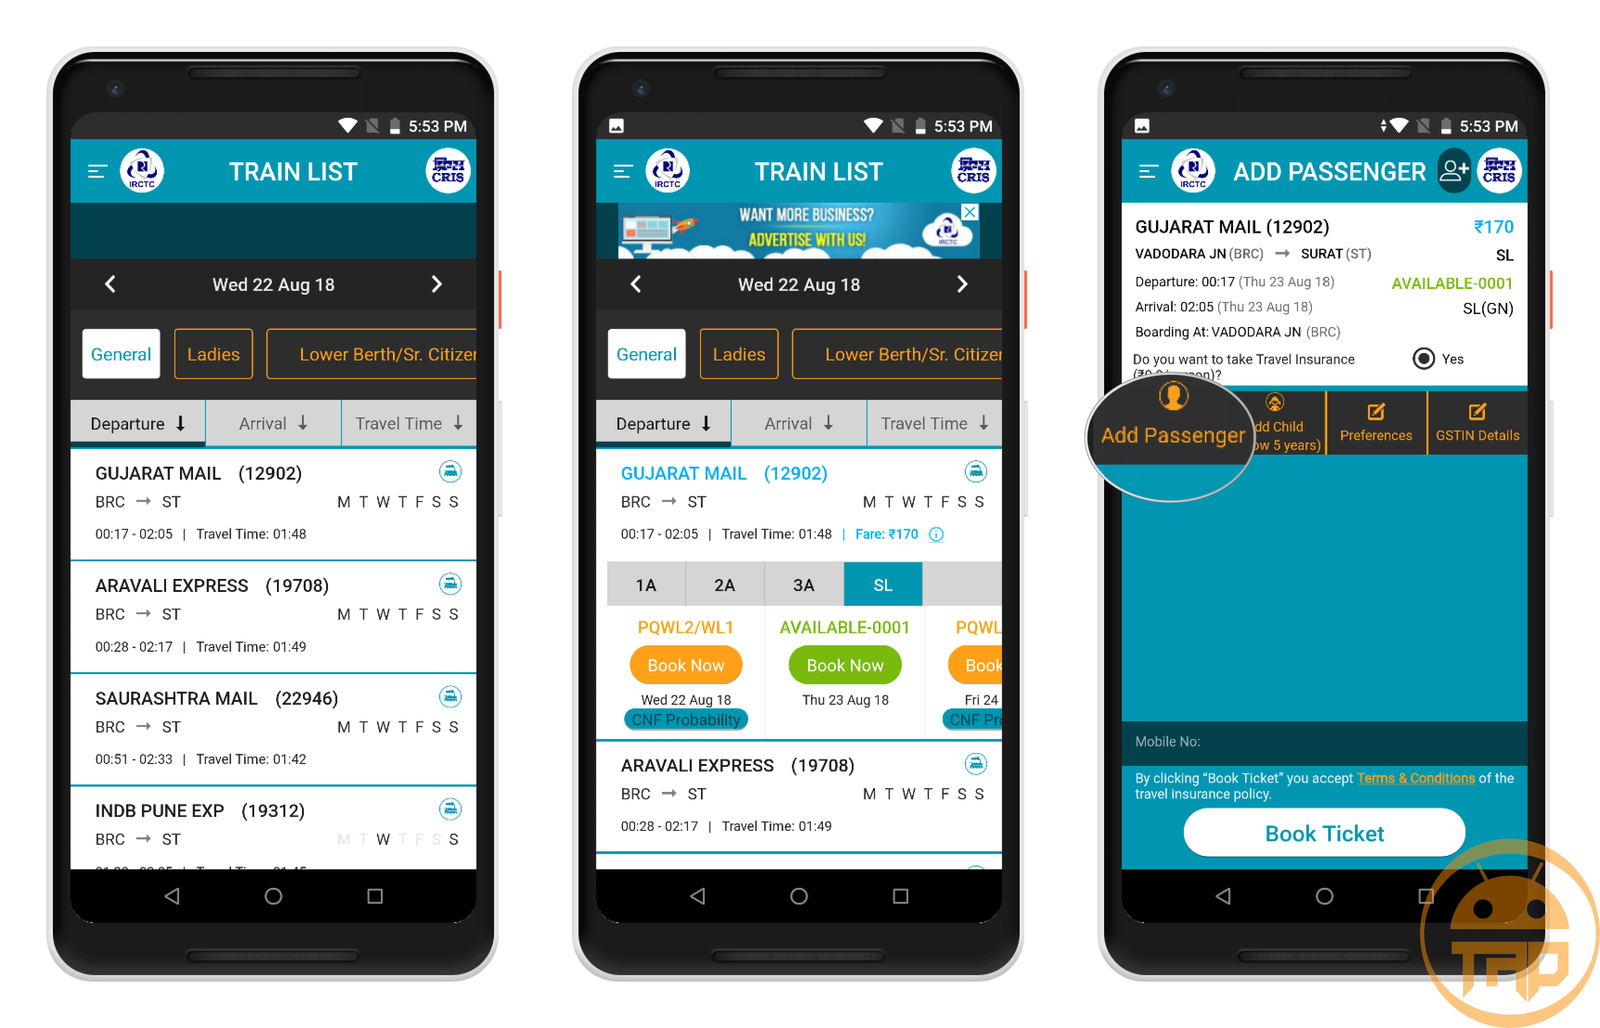 Ticket Booking on IRCTC Android App 2 - theandroidportal.com